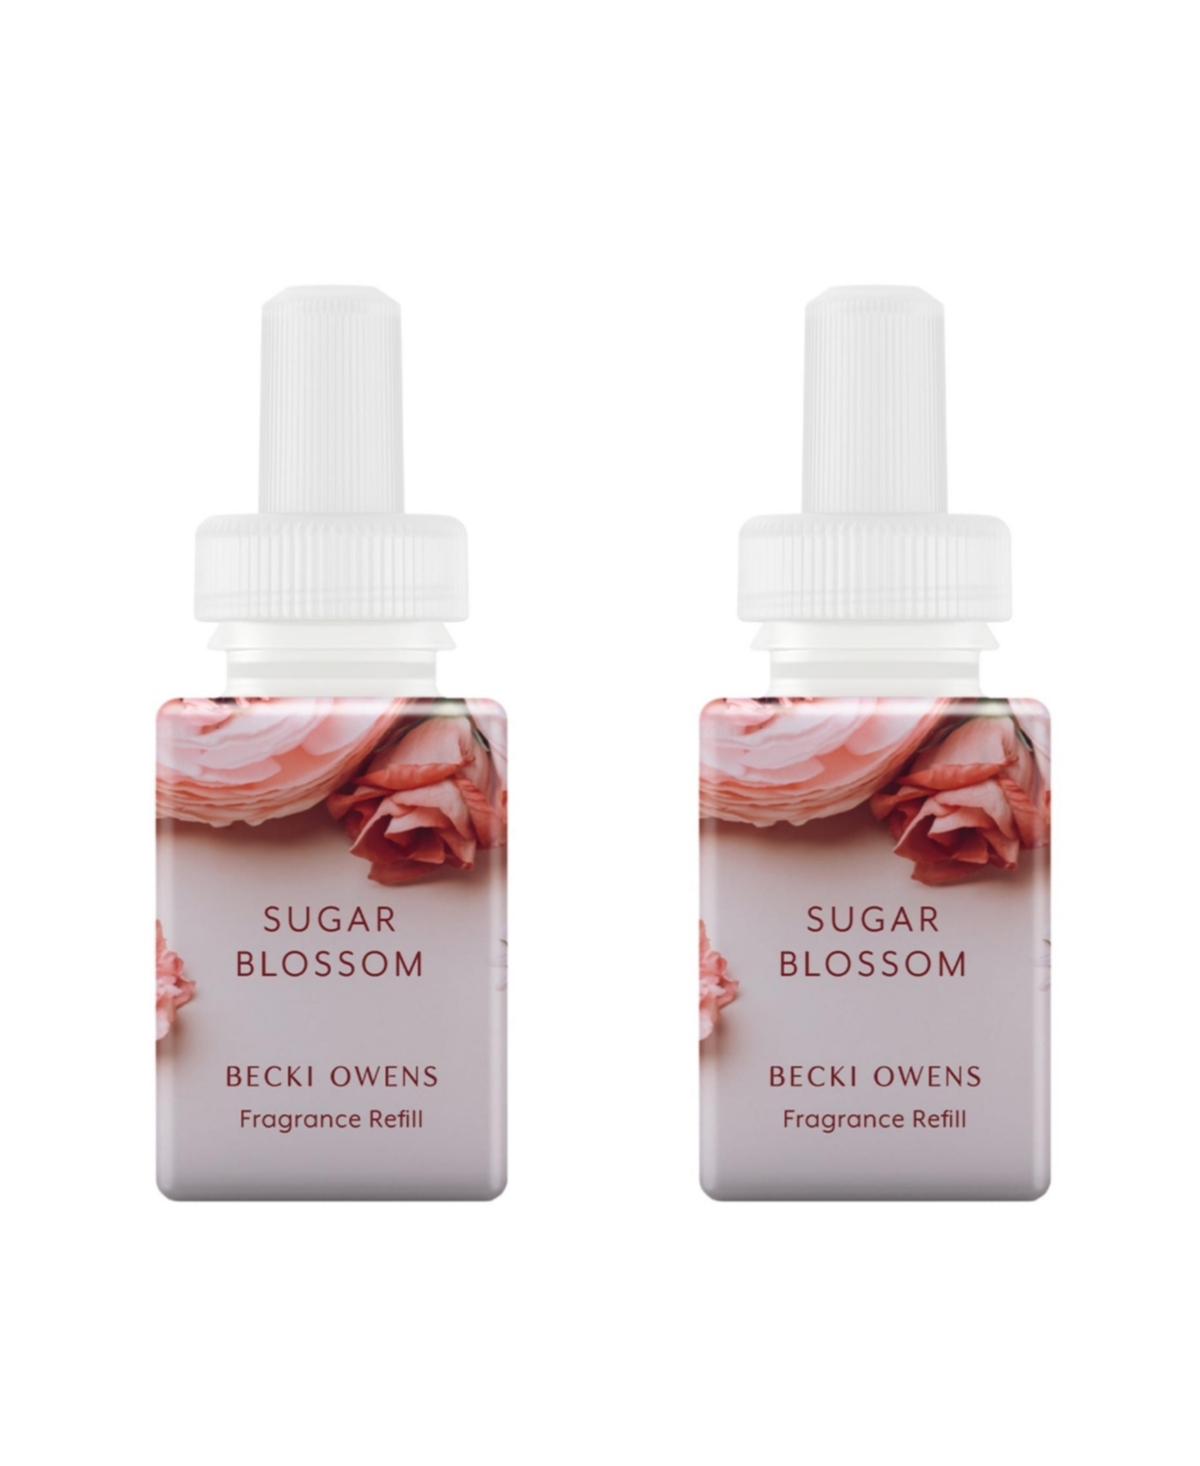 Becki Owens - Sugar Blossom - Home Scent Refill - Smart Home Air Diffuser Fragrance - Up to 120-Hours of Premium Fragrance per Refill - Household